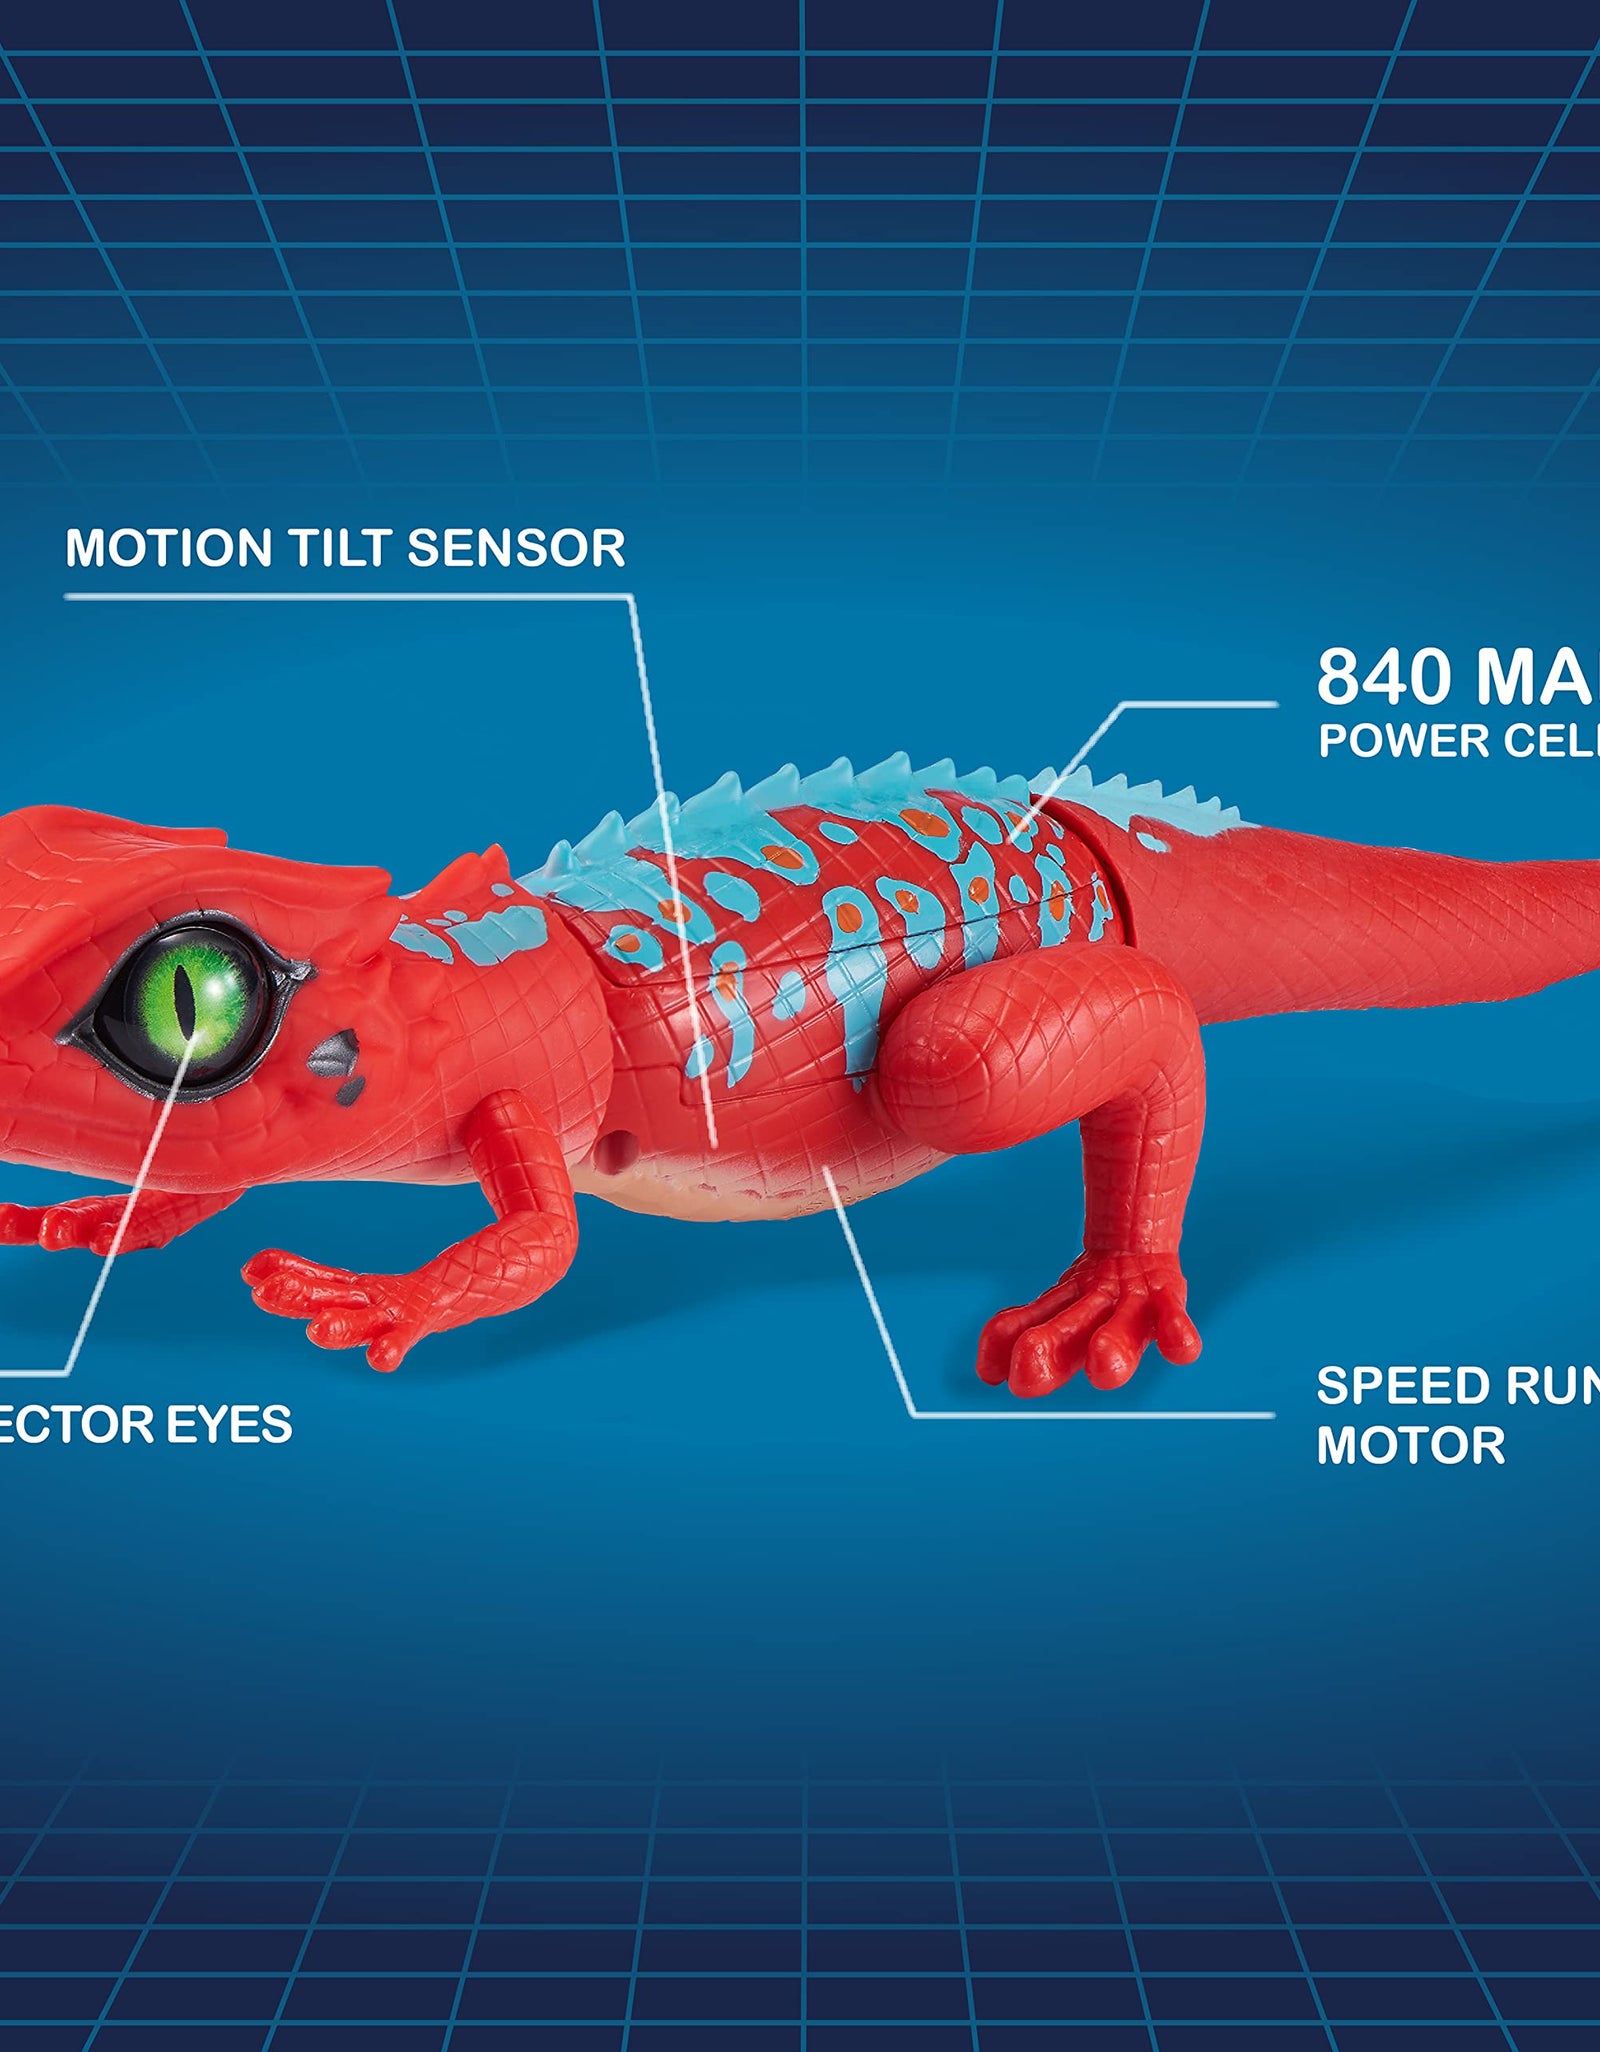 Robo Alive Lurking Lizard Battery-Powered Robotic Toy (Red + Blue) Series 2, Small